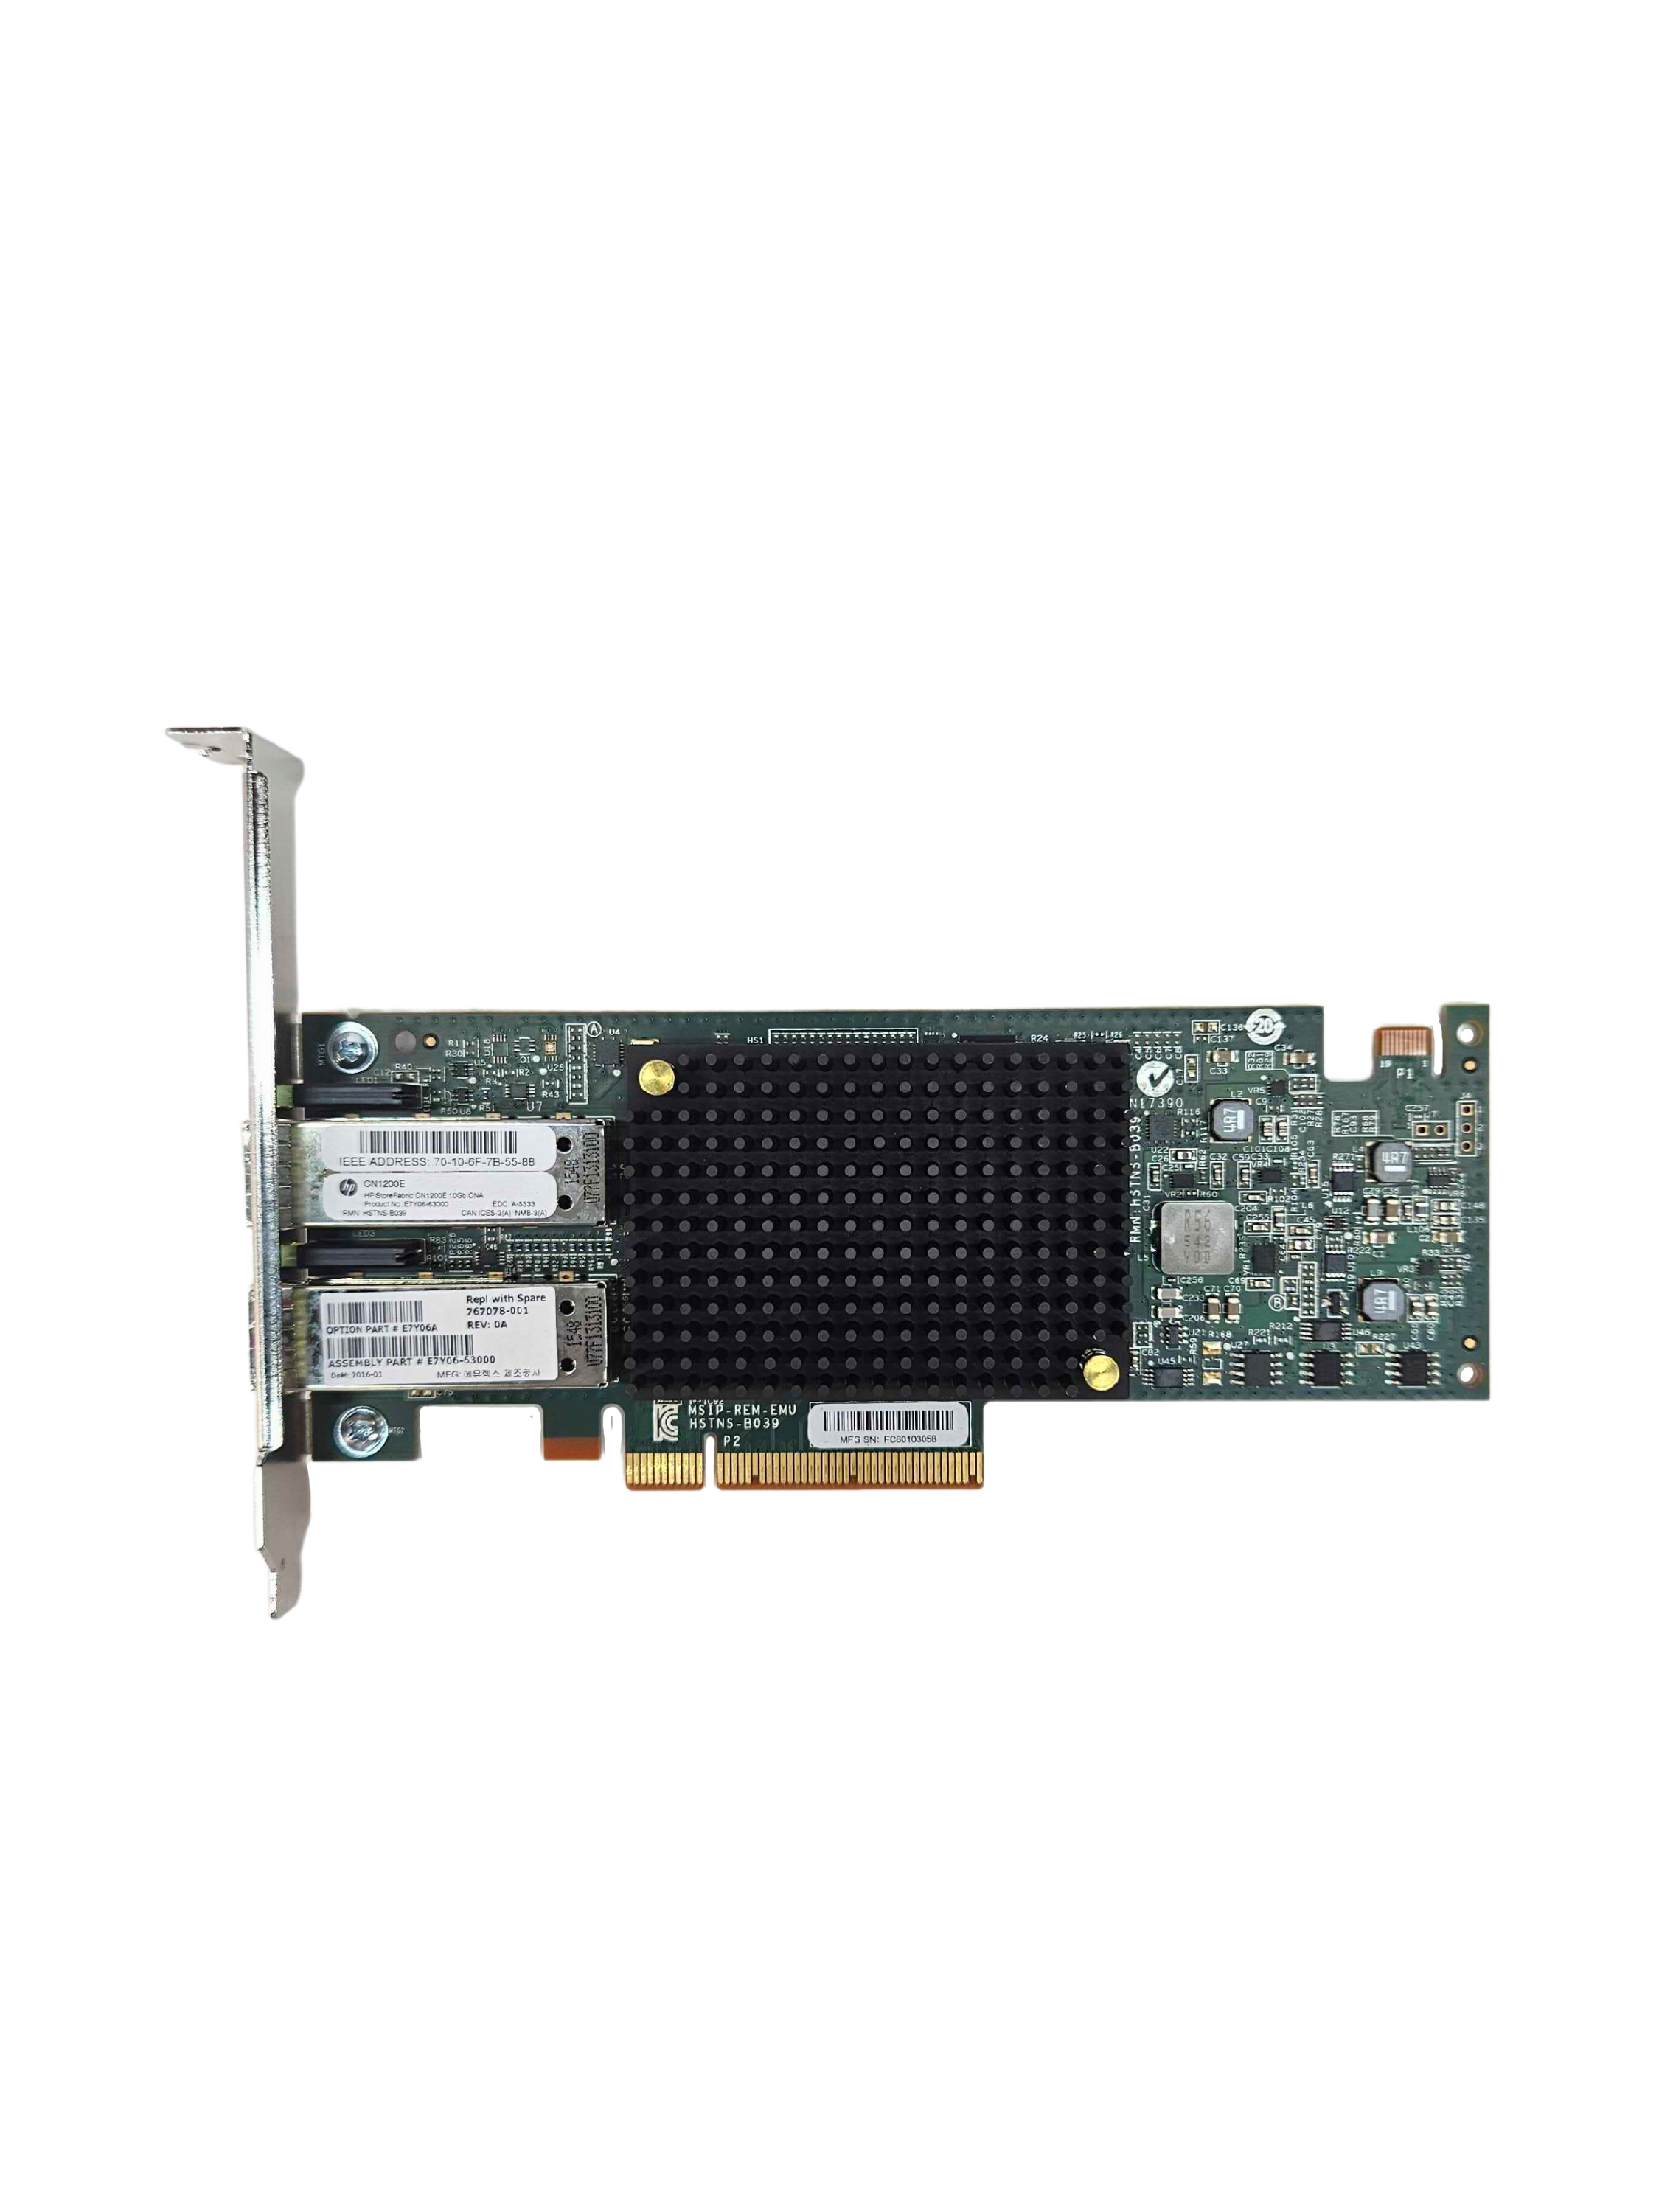 CN1200E 10GB CONVERGED NETWORK ADAPTER (E7Y06A)